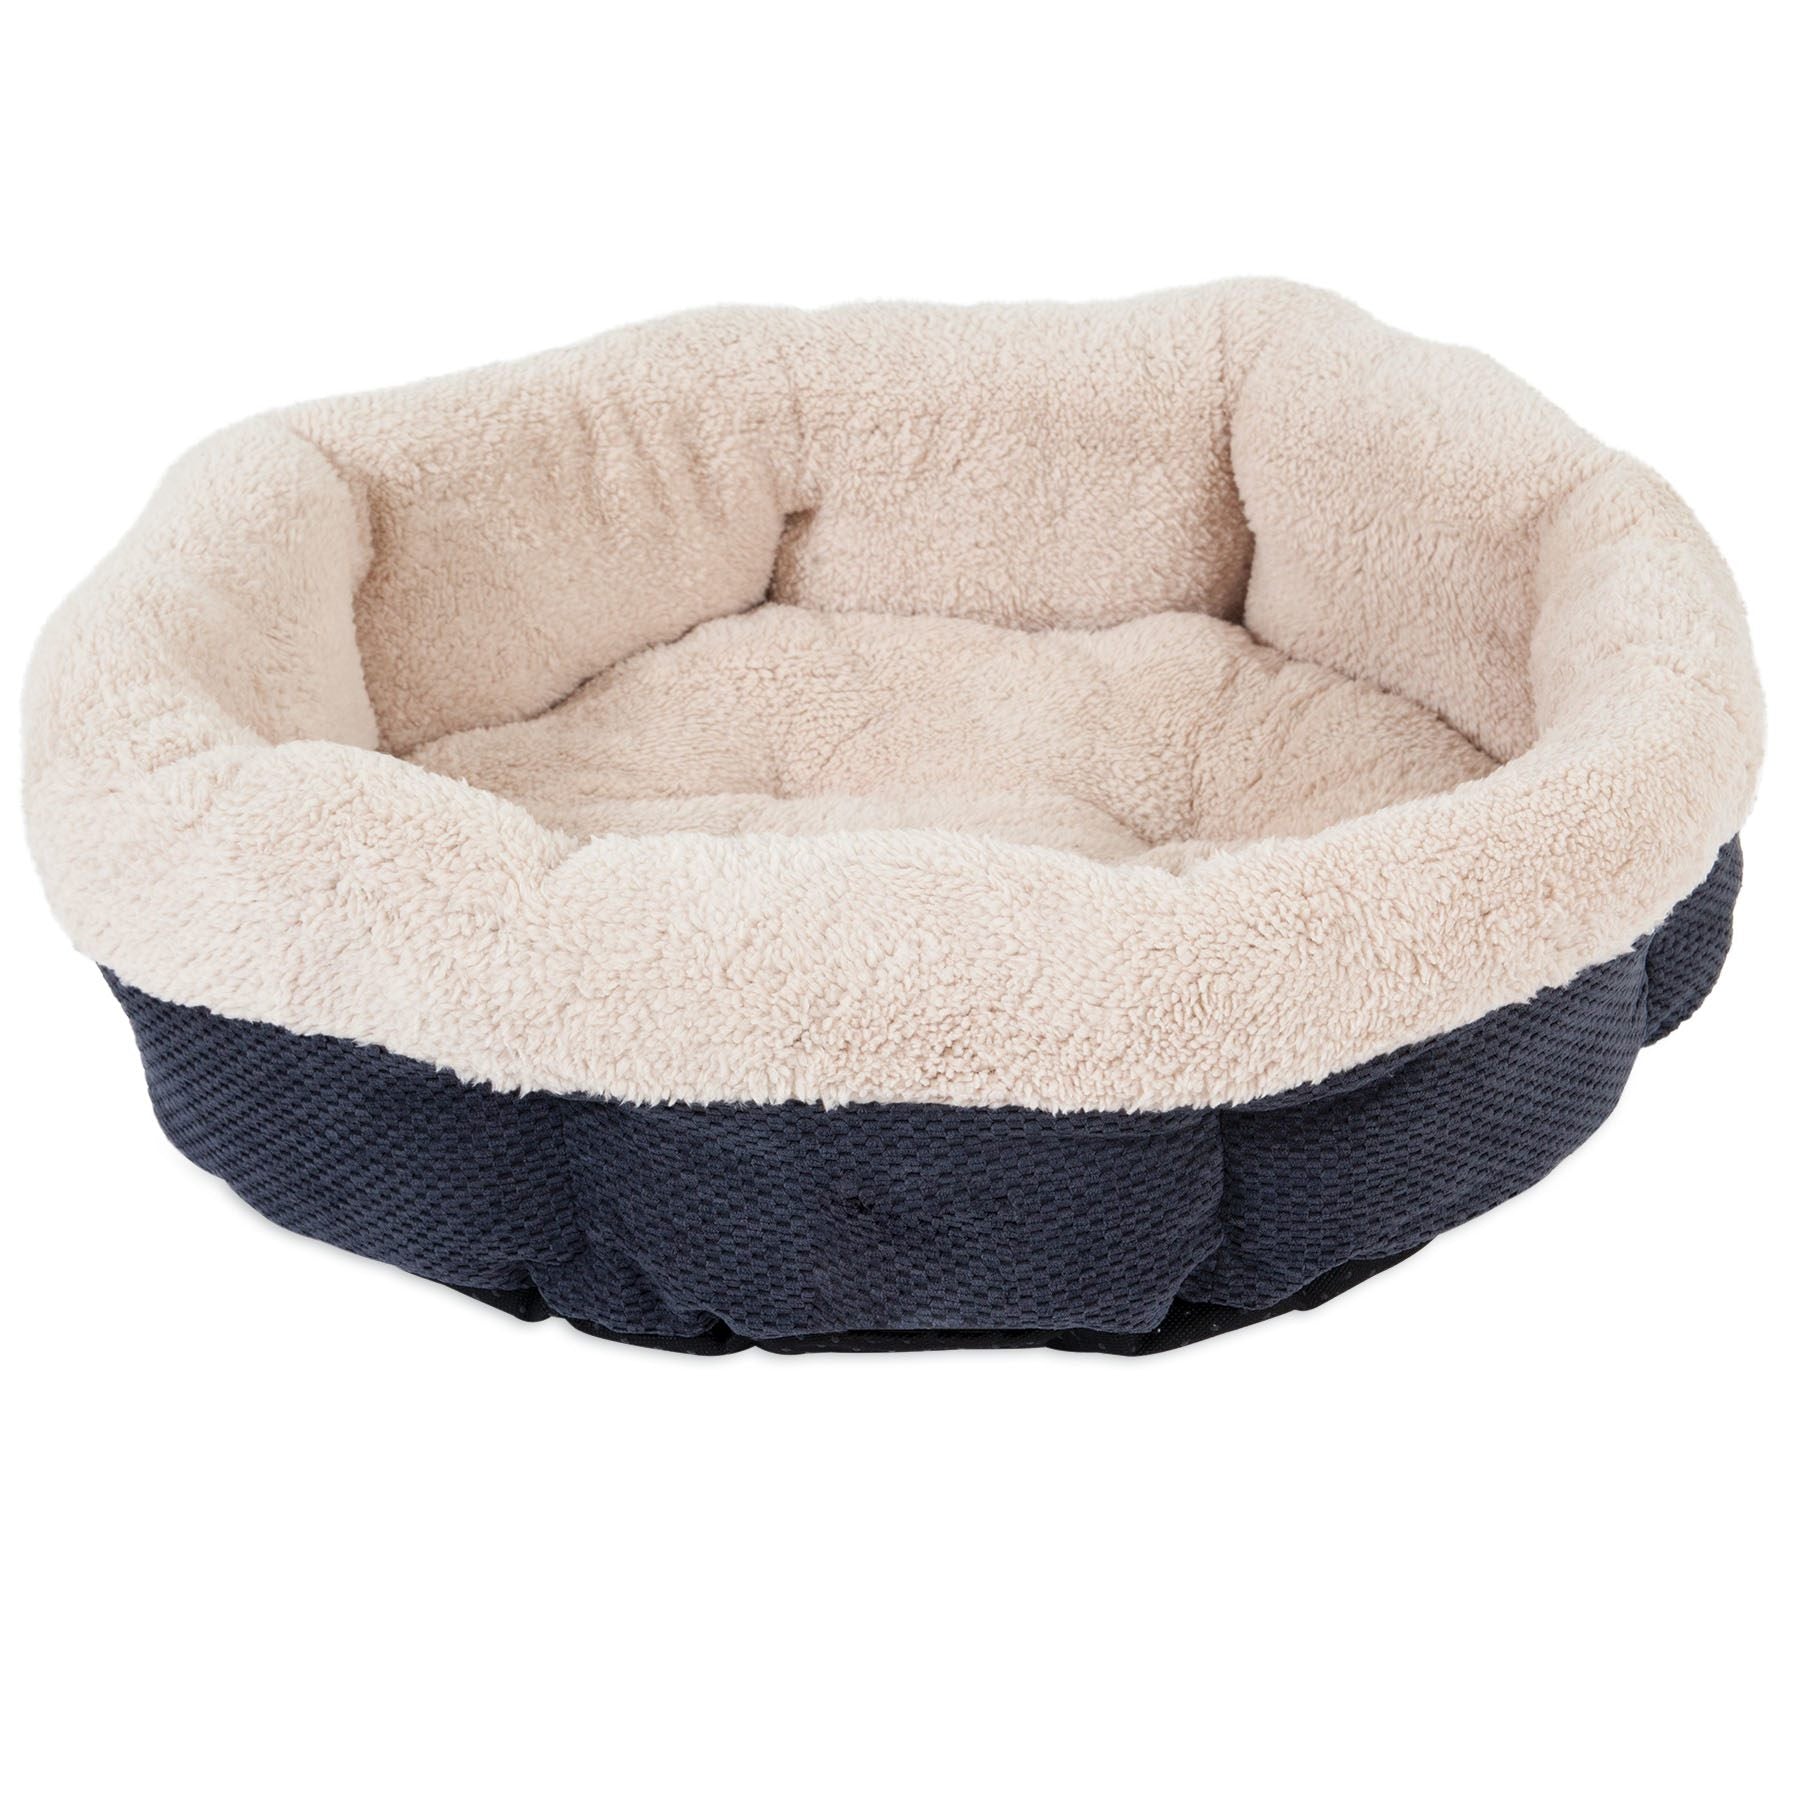 SnooZZy Mod Chic Shearling Round Bed - Black